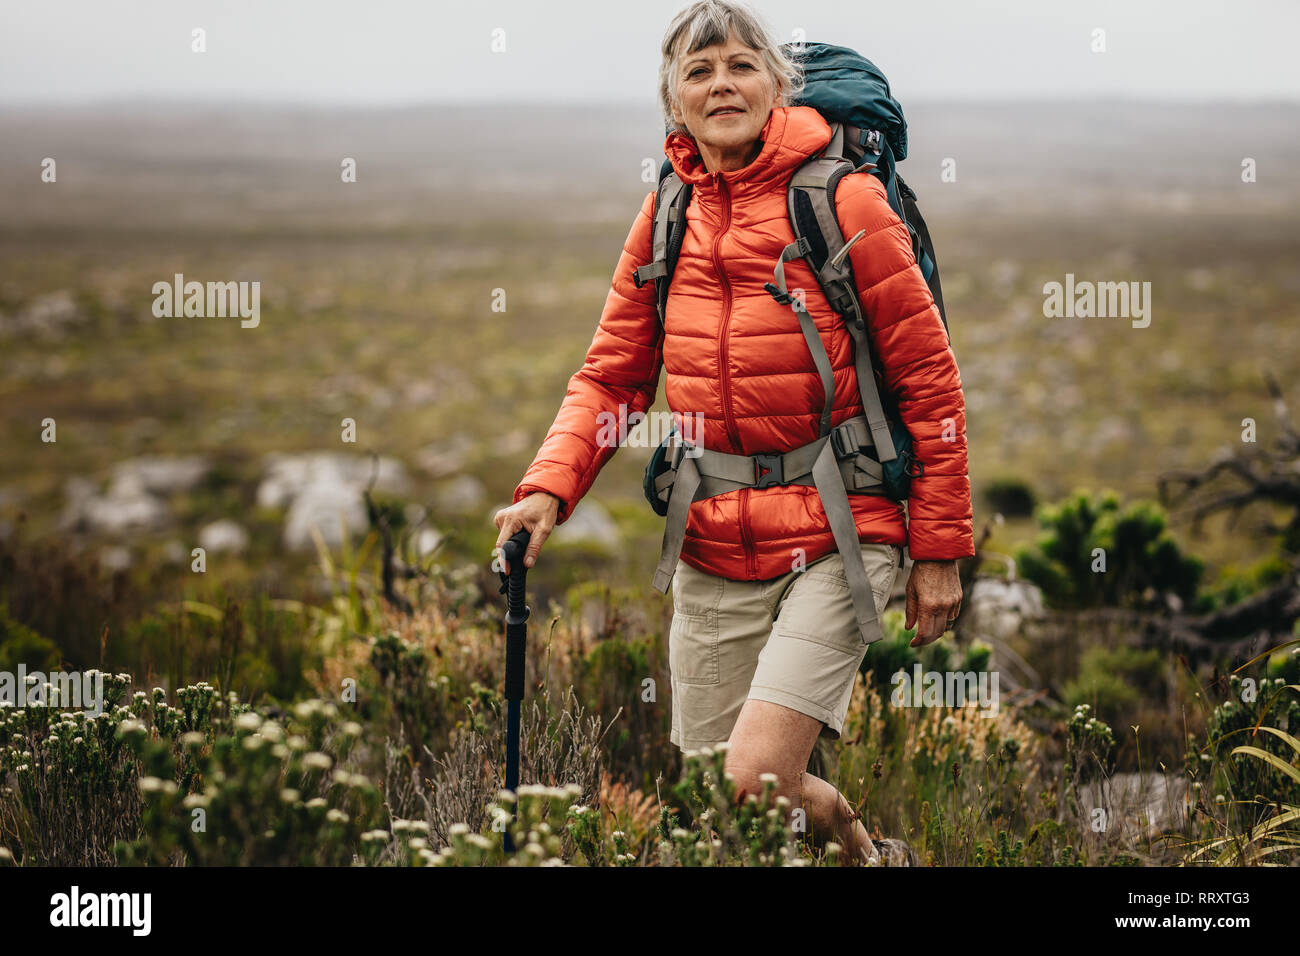 Adventurous senior woman on a hiking trip. Senior woman wearing jacket and backpack trekking in the countryside holding a hiking pole. Stock Photo